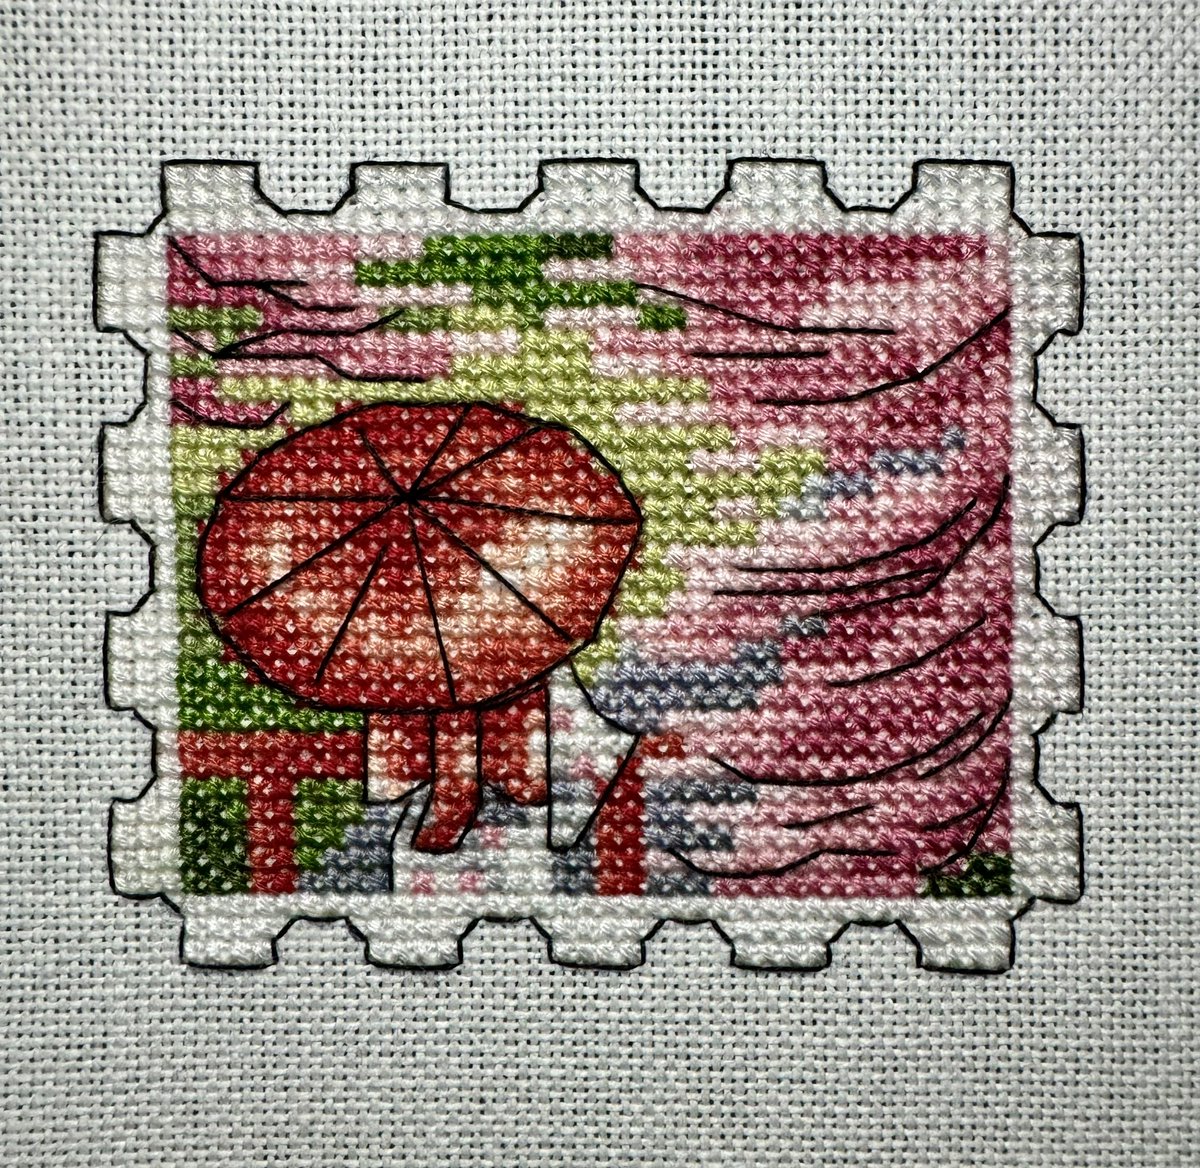 Feeling under the weather tonight but finished up this little cross stitch project. Design can be found @mybobbin_com  #crossstitch #crossstitchersofinstagram #sakura #xstitch #xstitchersofinstagram